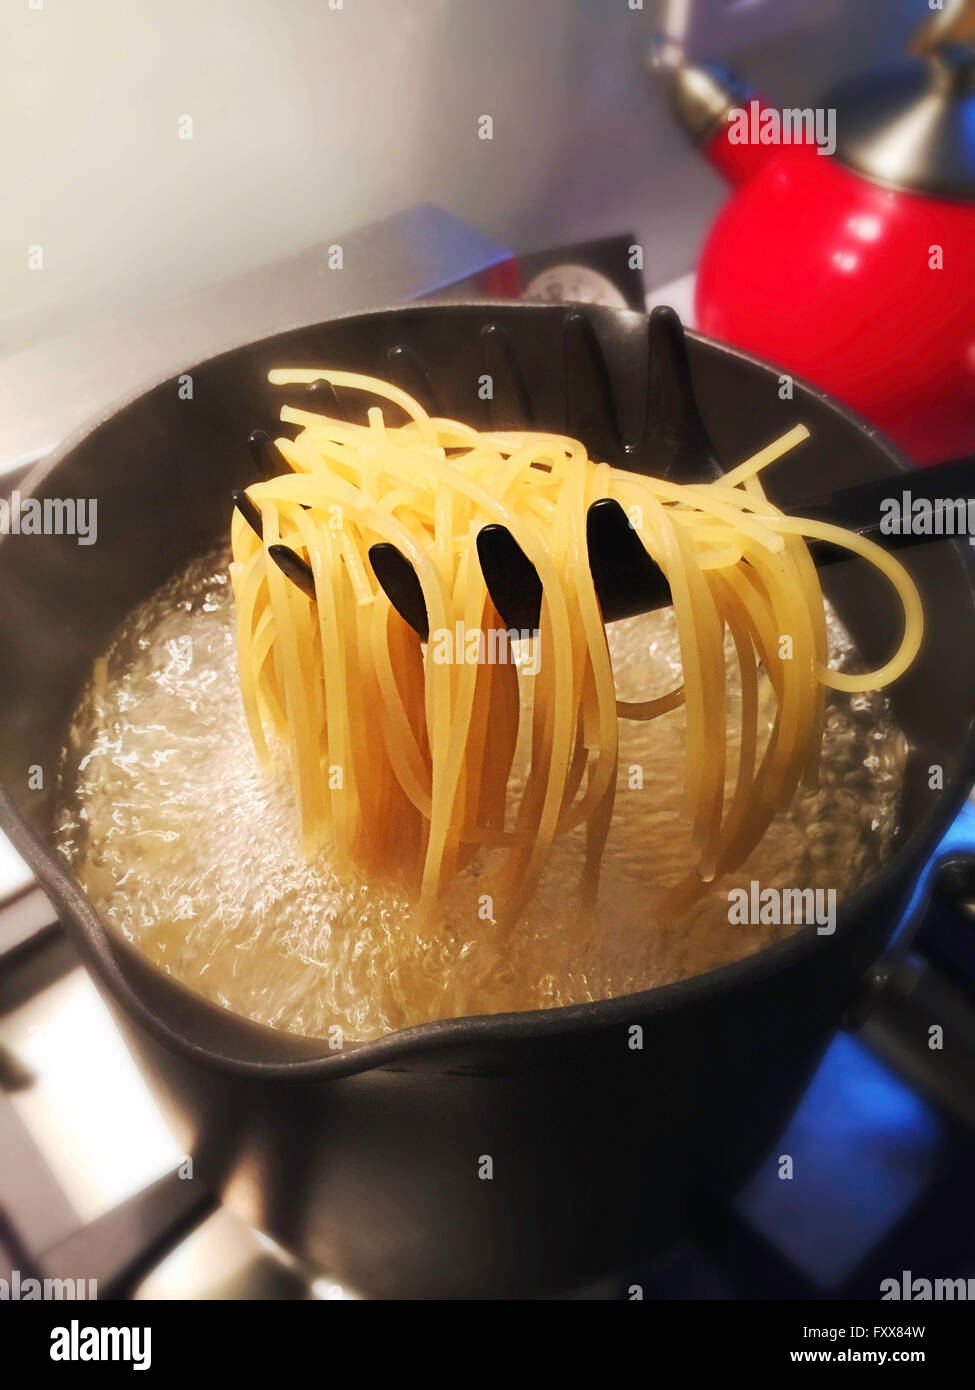 Boiling Water Cooking Pasta on Stove in Residential Kitchen Stock Photo